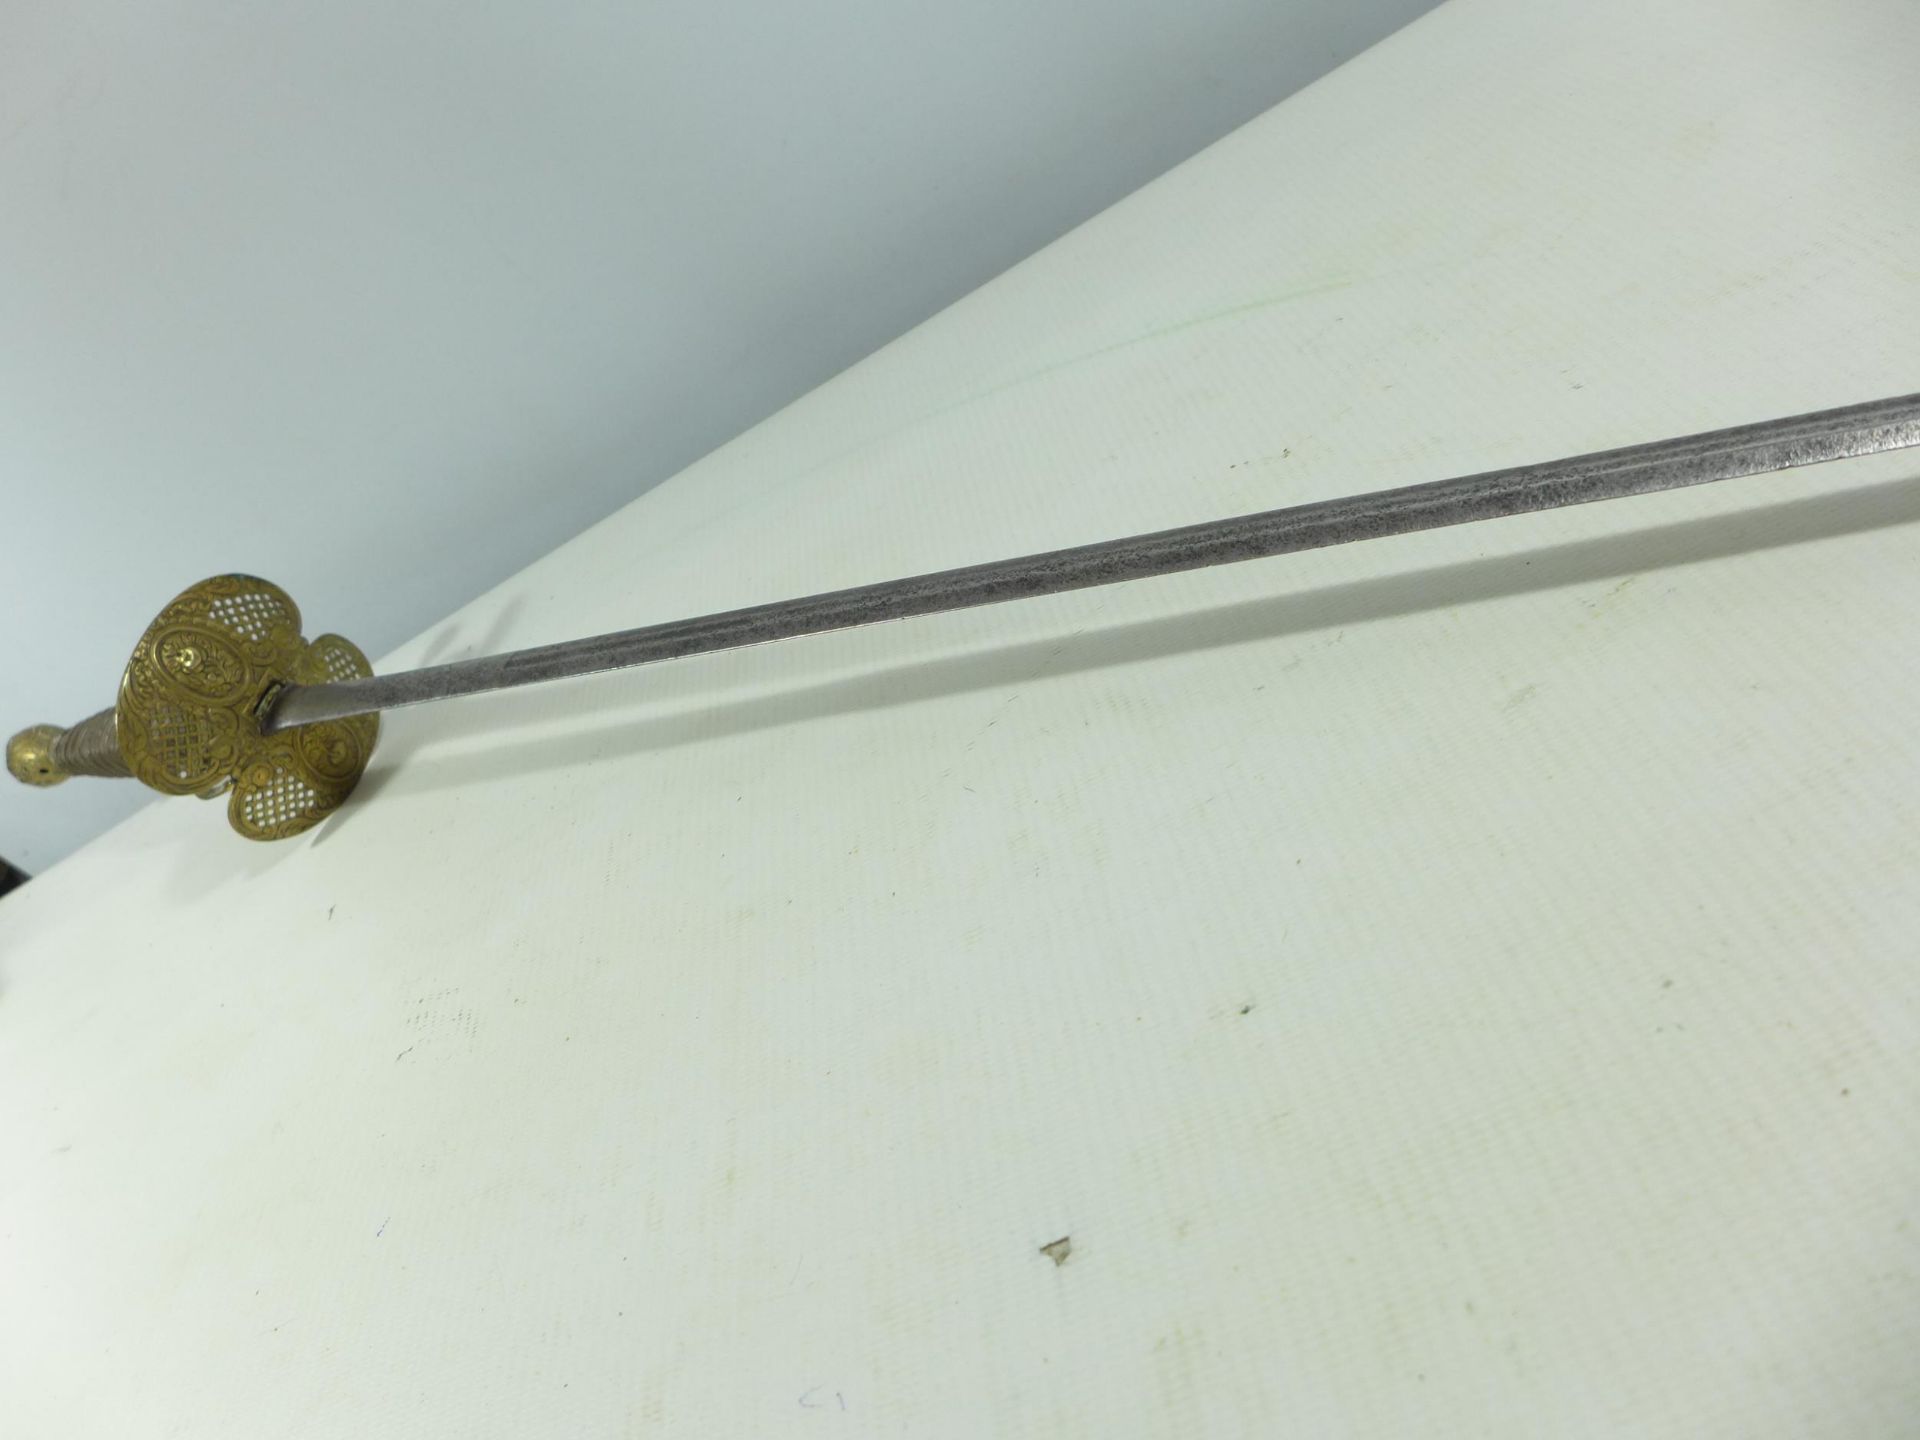 A LATE 18TH/EARLY 19TH CENTURY SMALLSWORD, 73CM BLADE, PIERCED BRASS GUARD, WHITE METAL GRIP, A/F - Image 4 of 5